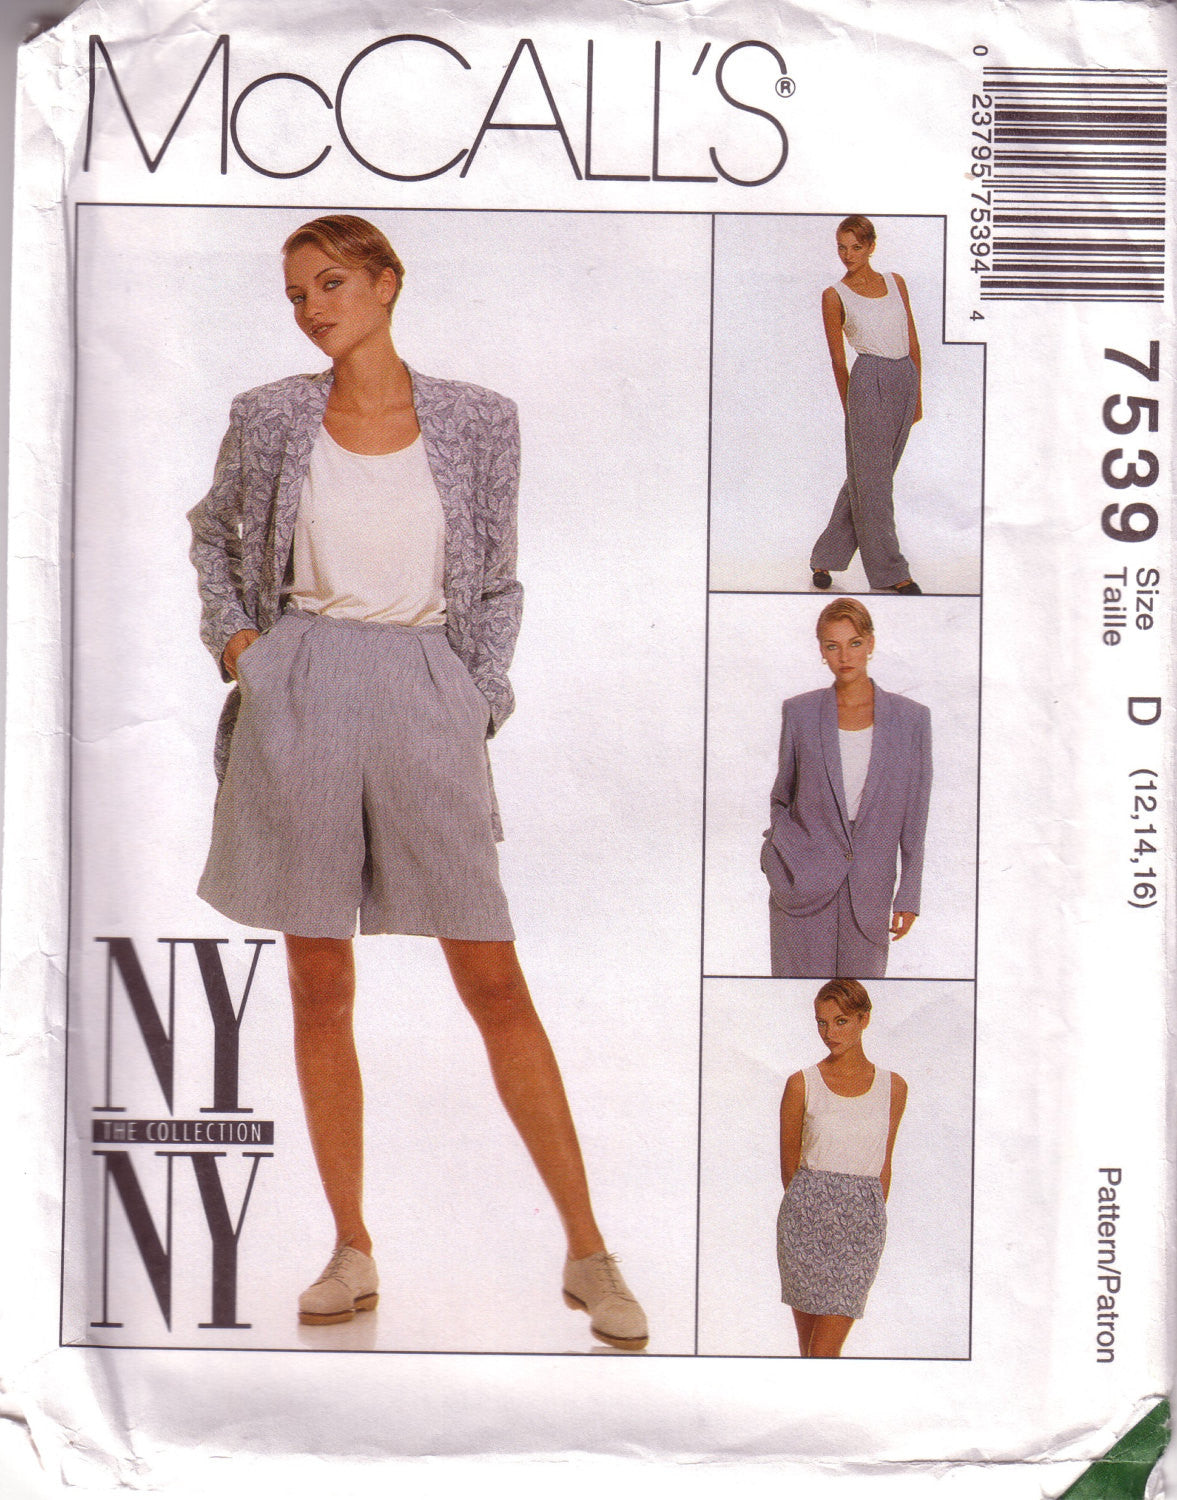 McCall's 7539, Vintage NY NY Collection, Misses Lined Jacket, Skirt, Pants, Shorts, Tank, Size 12, 14, 16 - Couture Service  - 1